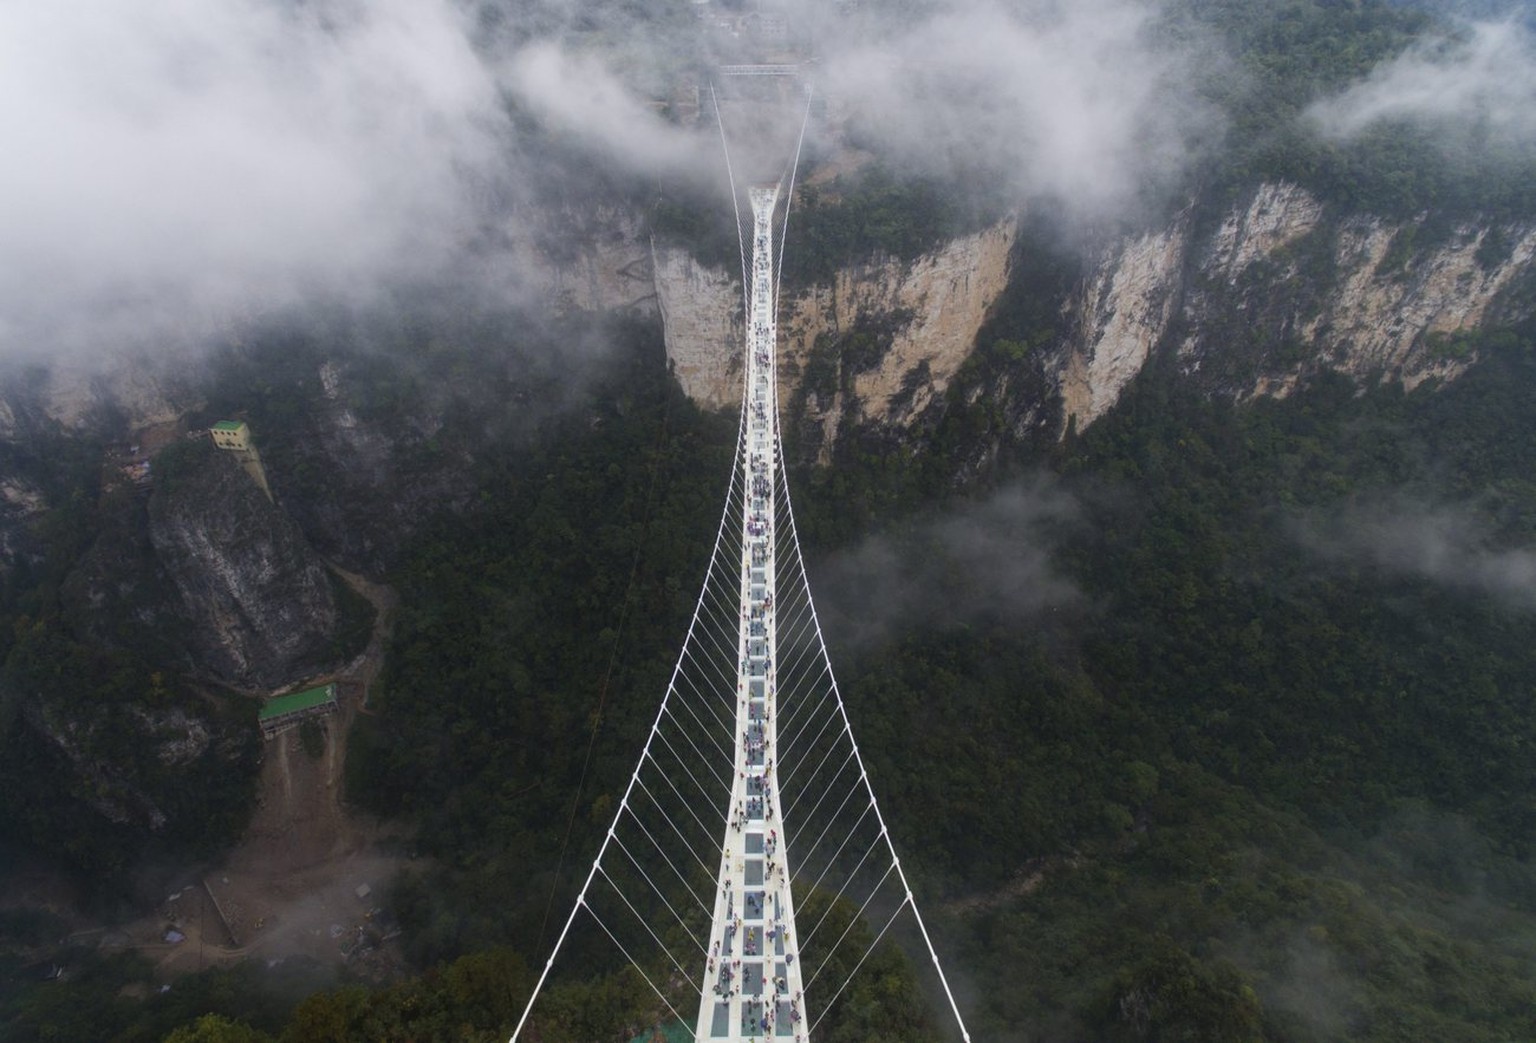 epa05593548 An aerial view of the Zhangjiajie Grand Canyon Glass Bridge in Zhangjiajie City, Hunan Province, central China, 20 October 2016. Claimed by China to be the longest and highest glass bridge ...